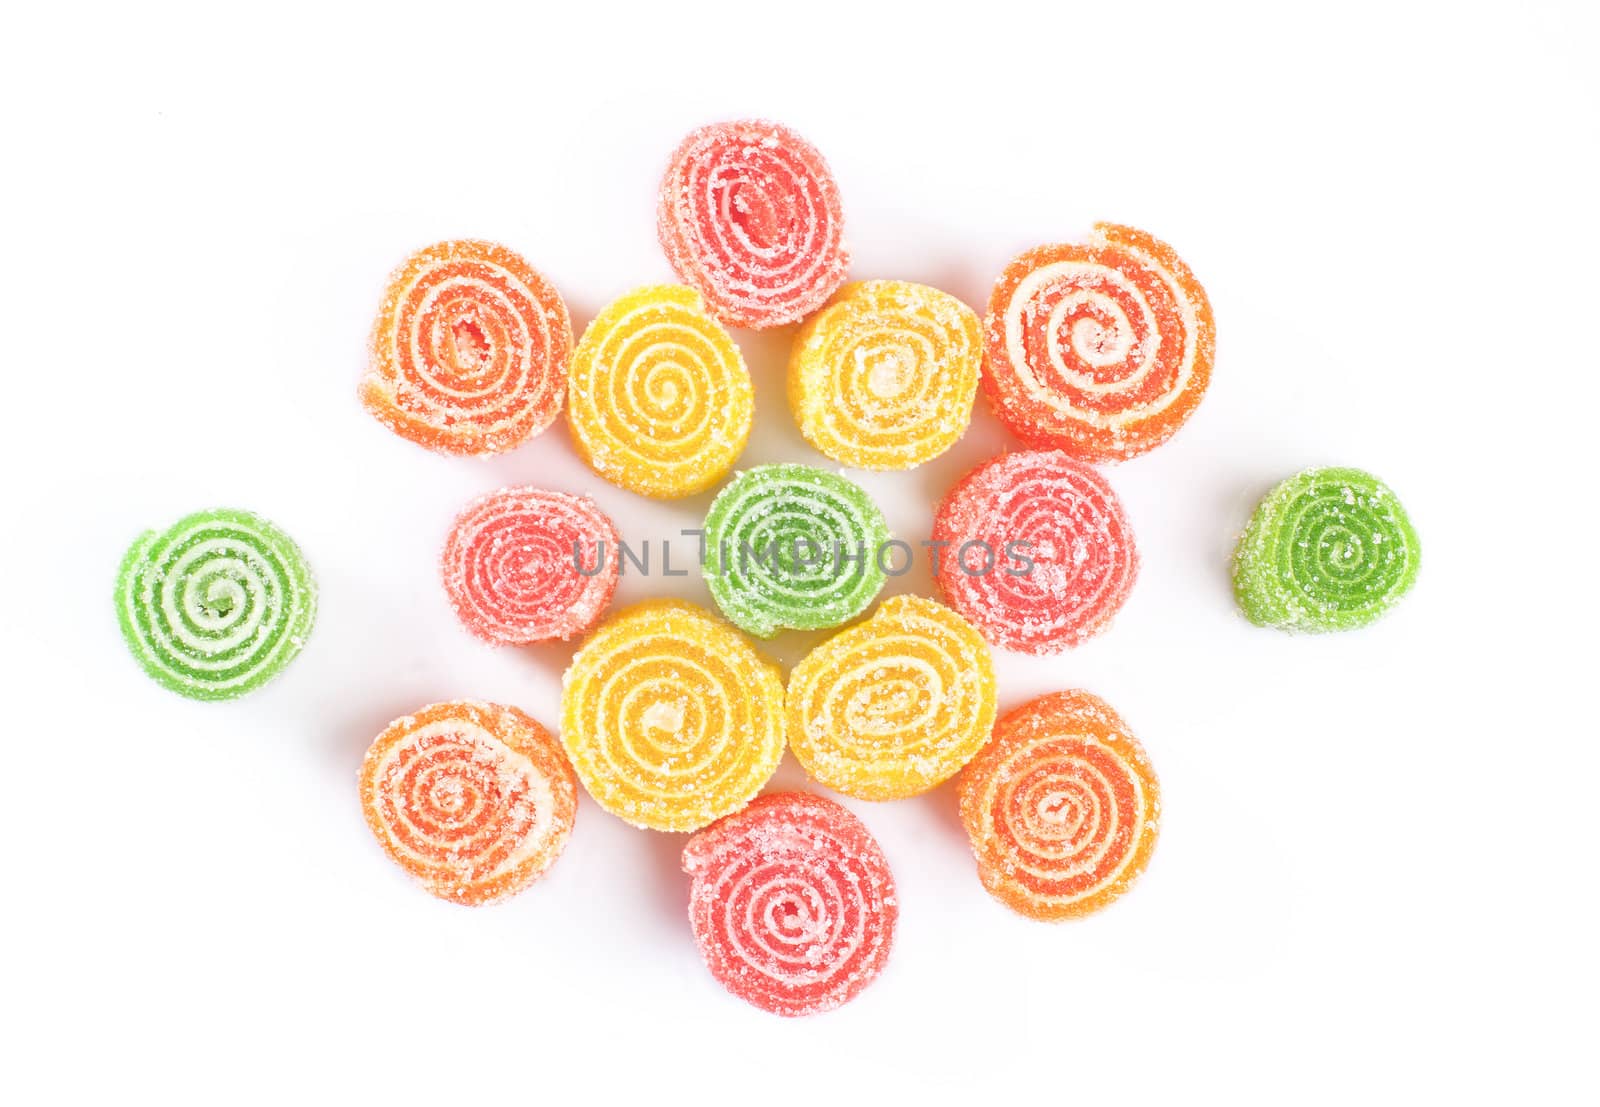 Candied fruit jelly on isolated white background